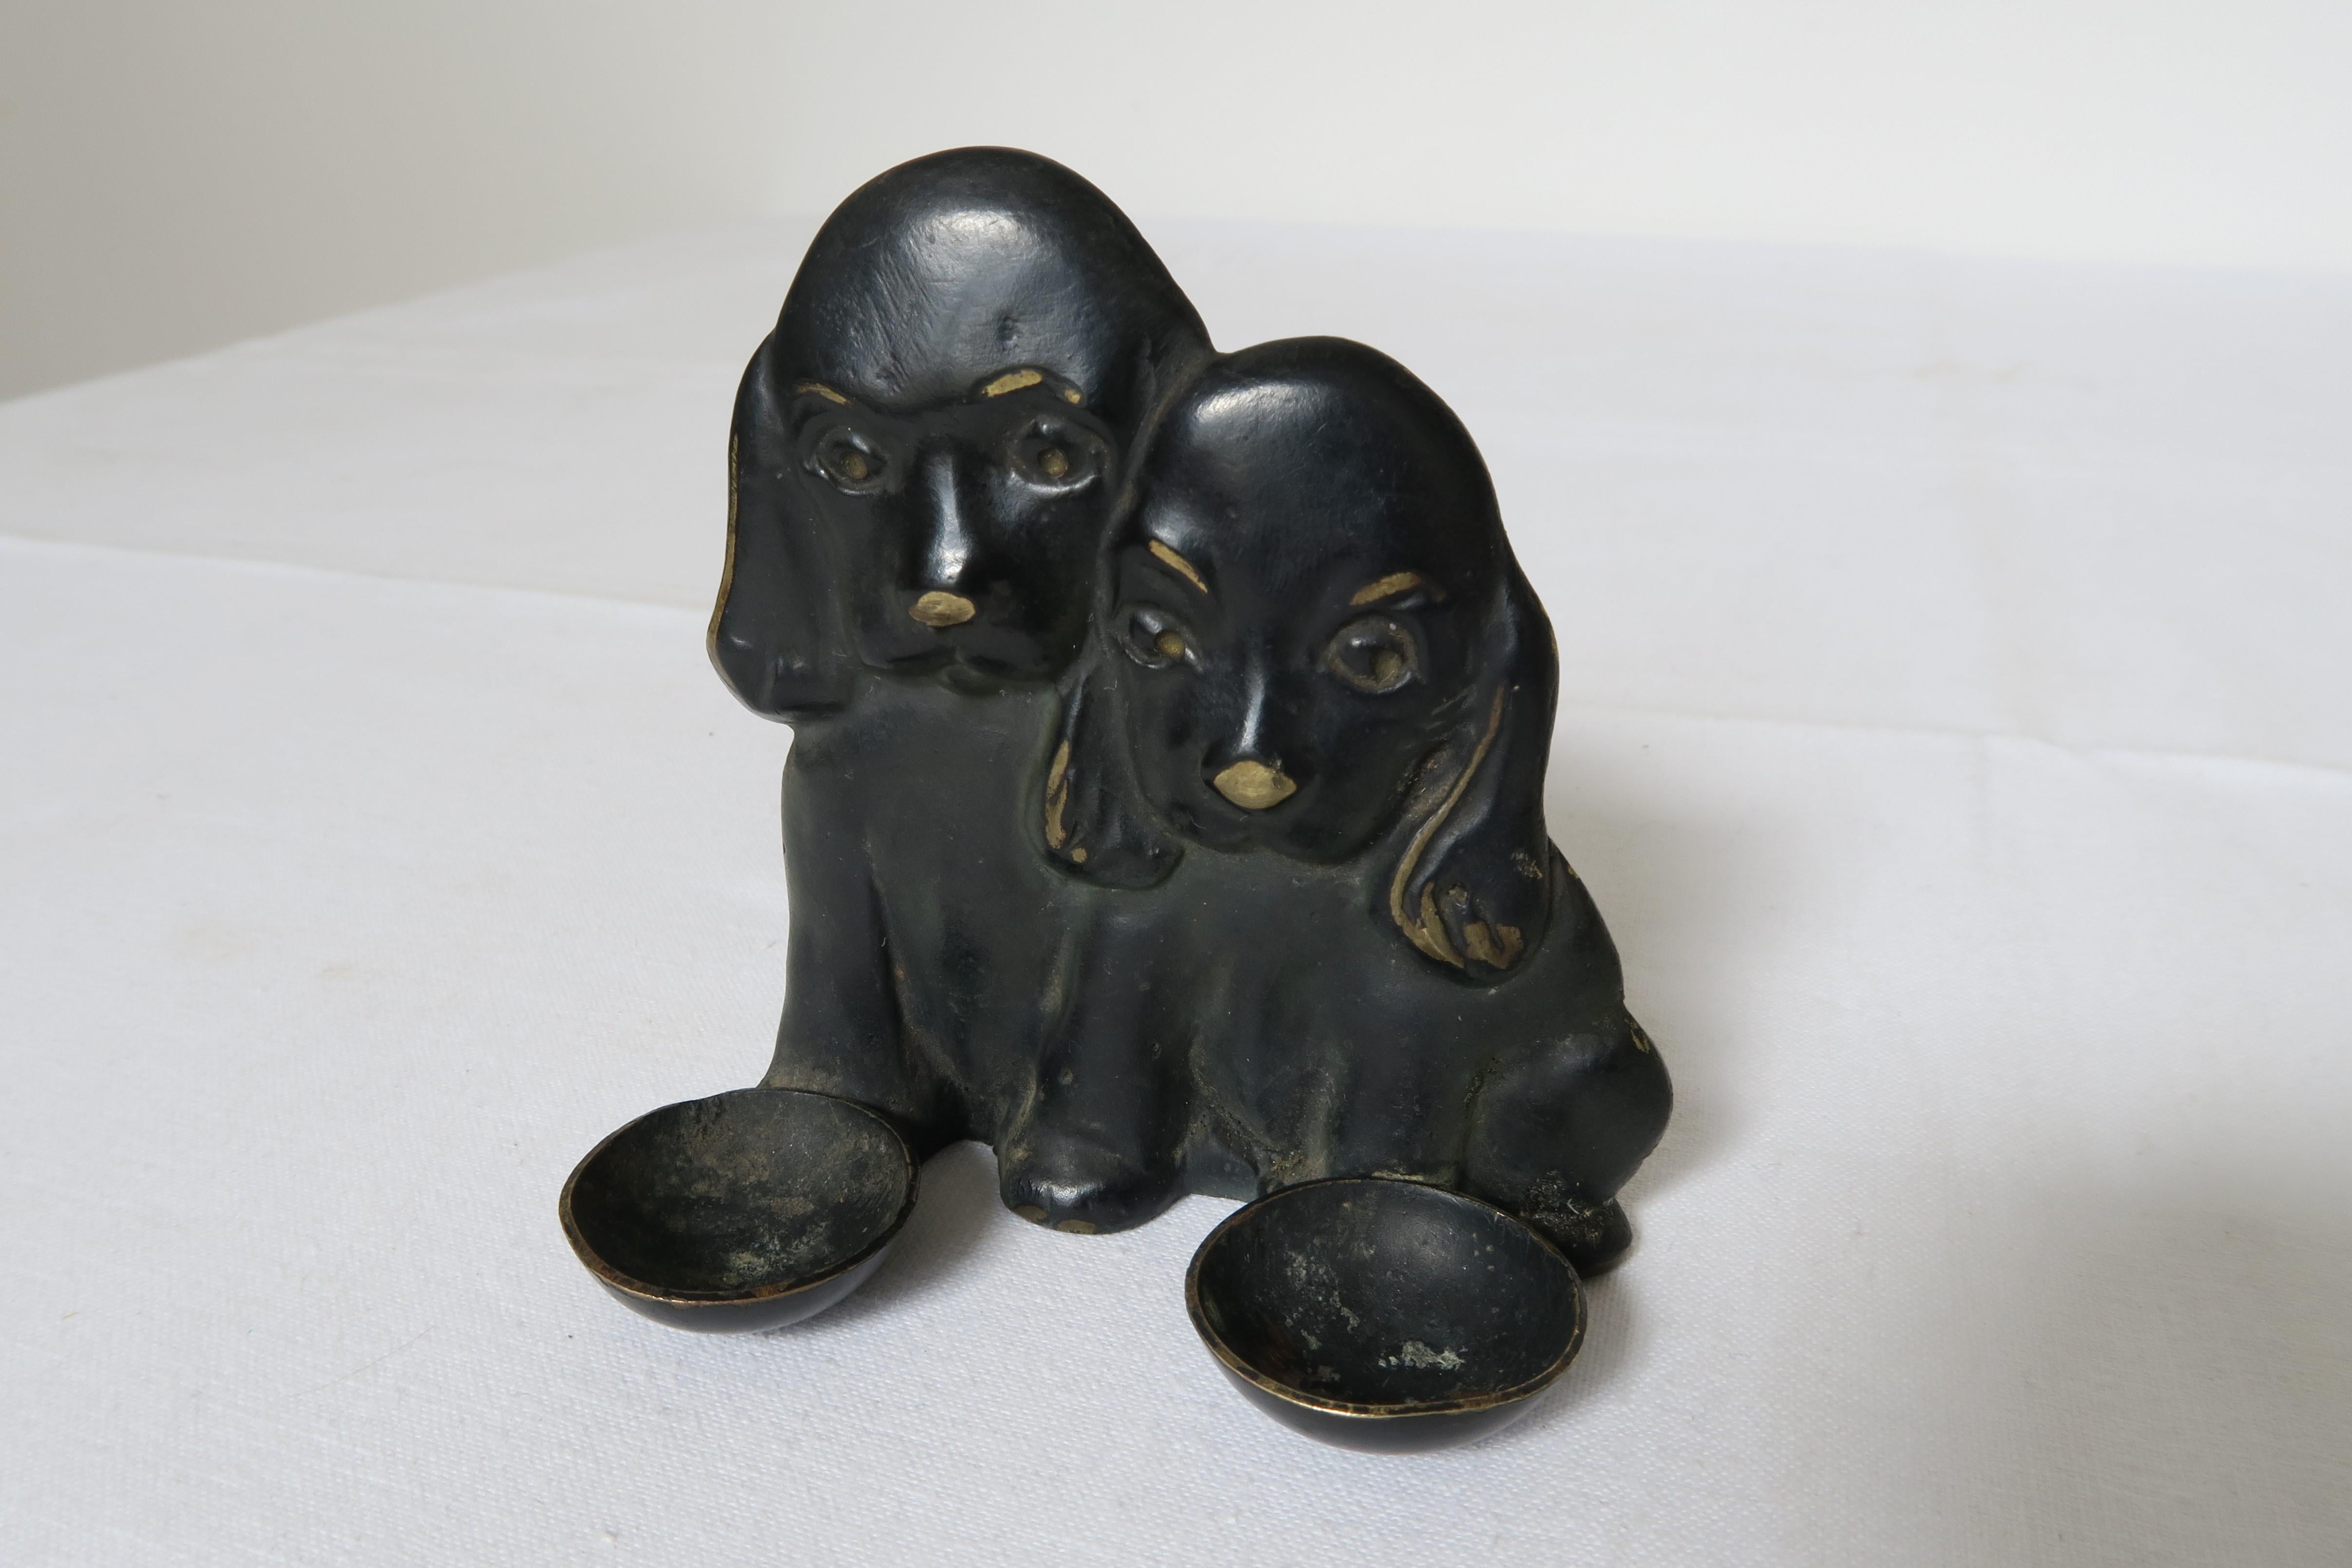 The object on sale is a little bronze figurine modelled after an endearing pair of cocker spaniel pups, that was originally intended to hold salt and pepper dispensers. But it can also just be appreciated for its decorative qualities. It was